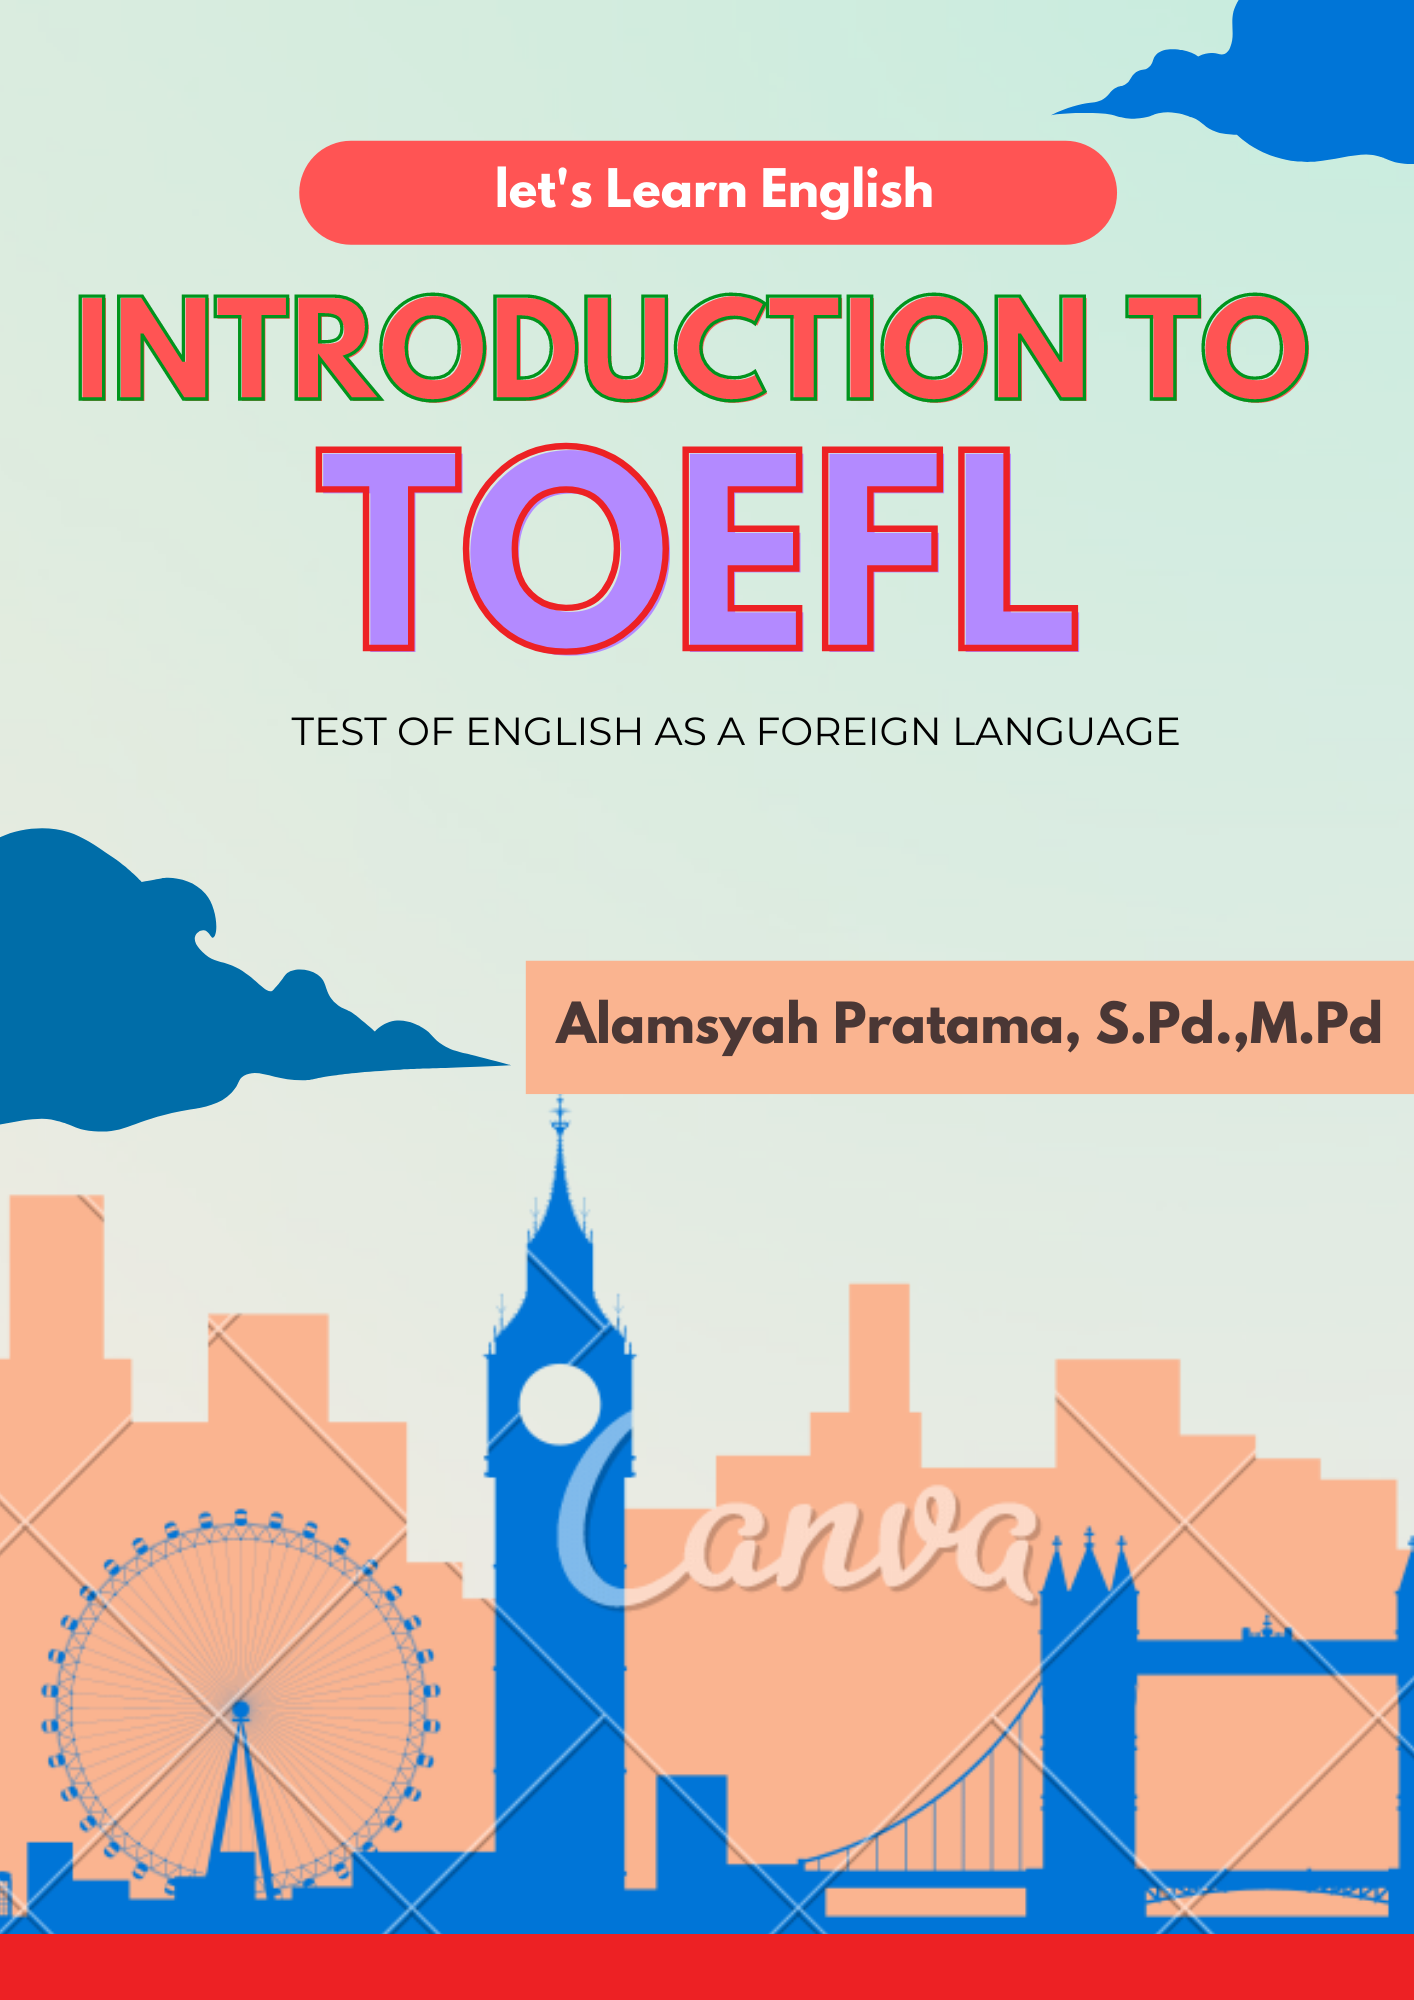 INTRODUCTION TO TOEFL